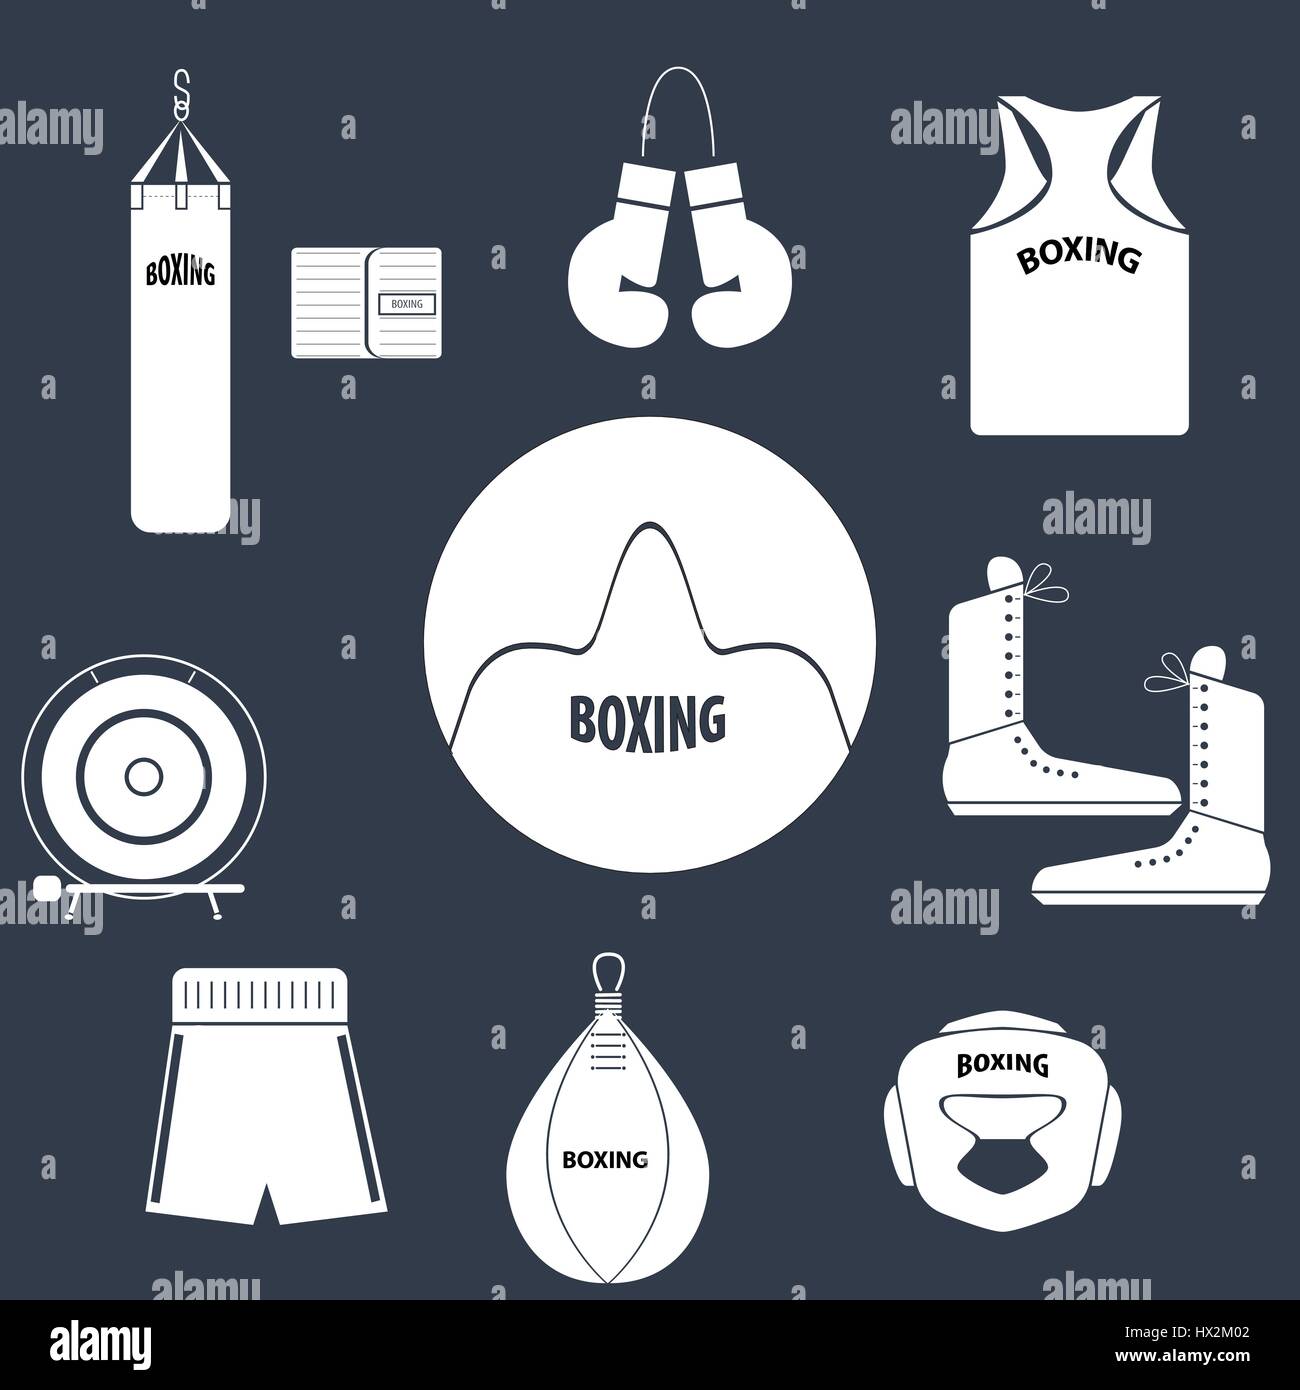 Boxing icons in a flat style, martial arts Stock Vector